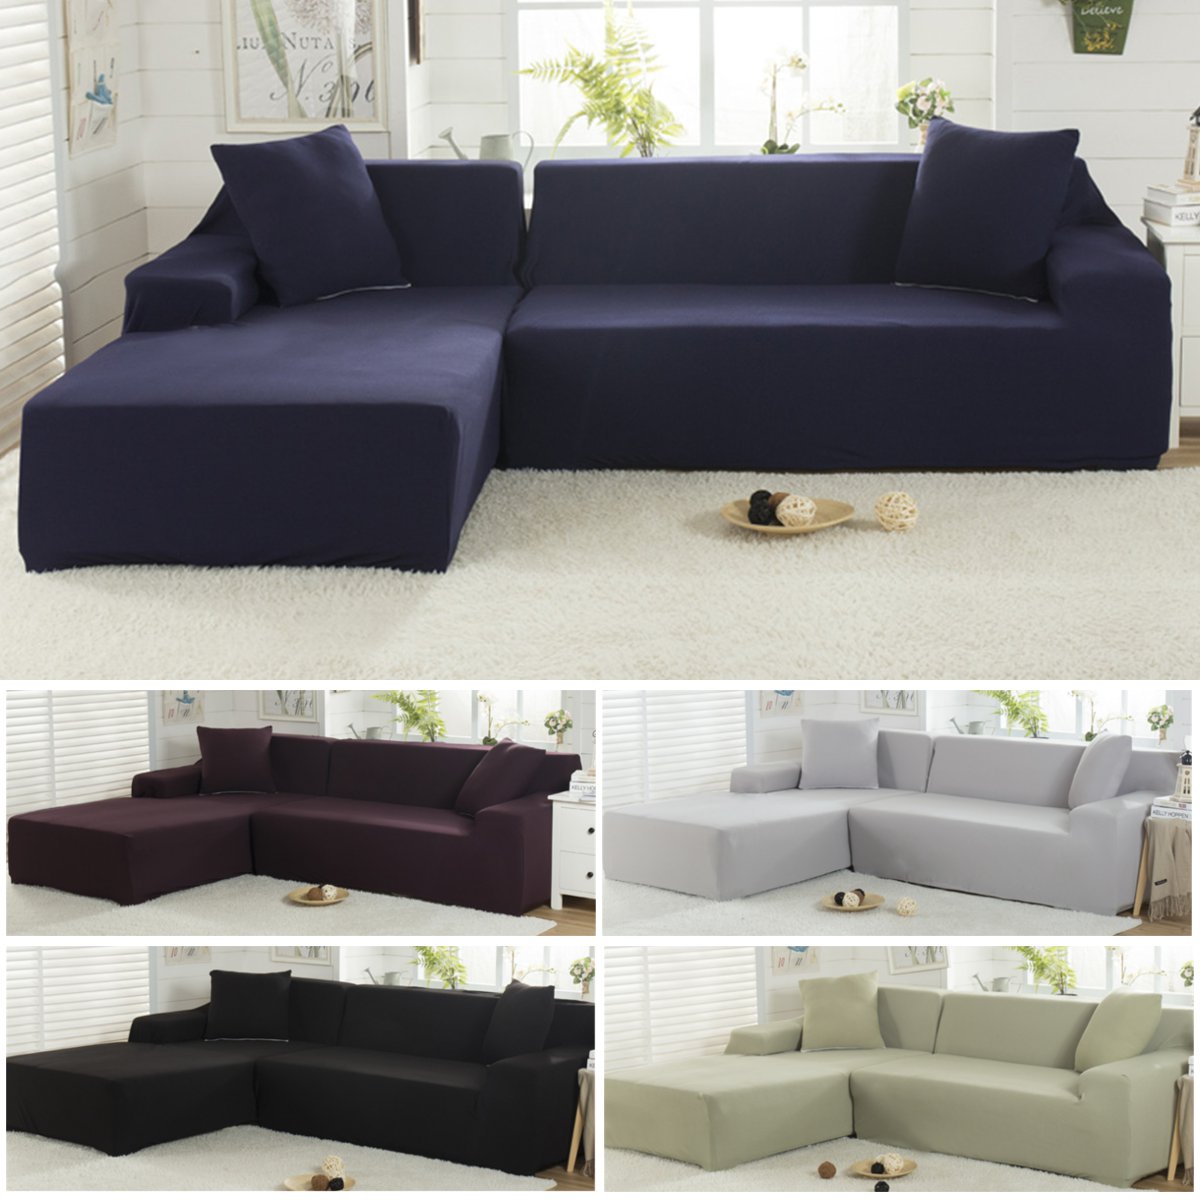 L-Shape-Couch-Cover-Stretch-Elastic-Fabric-Sofa-Cover-Pet-Sectional-Corner-Chair-Covers-1507970-1